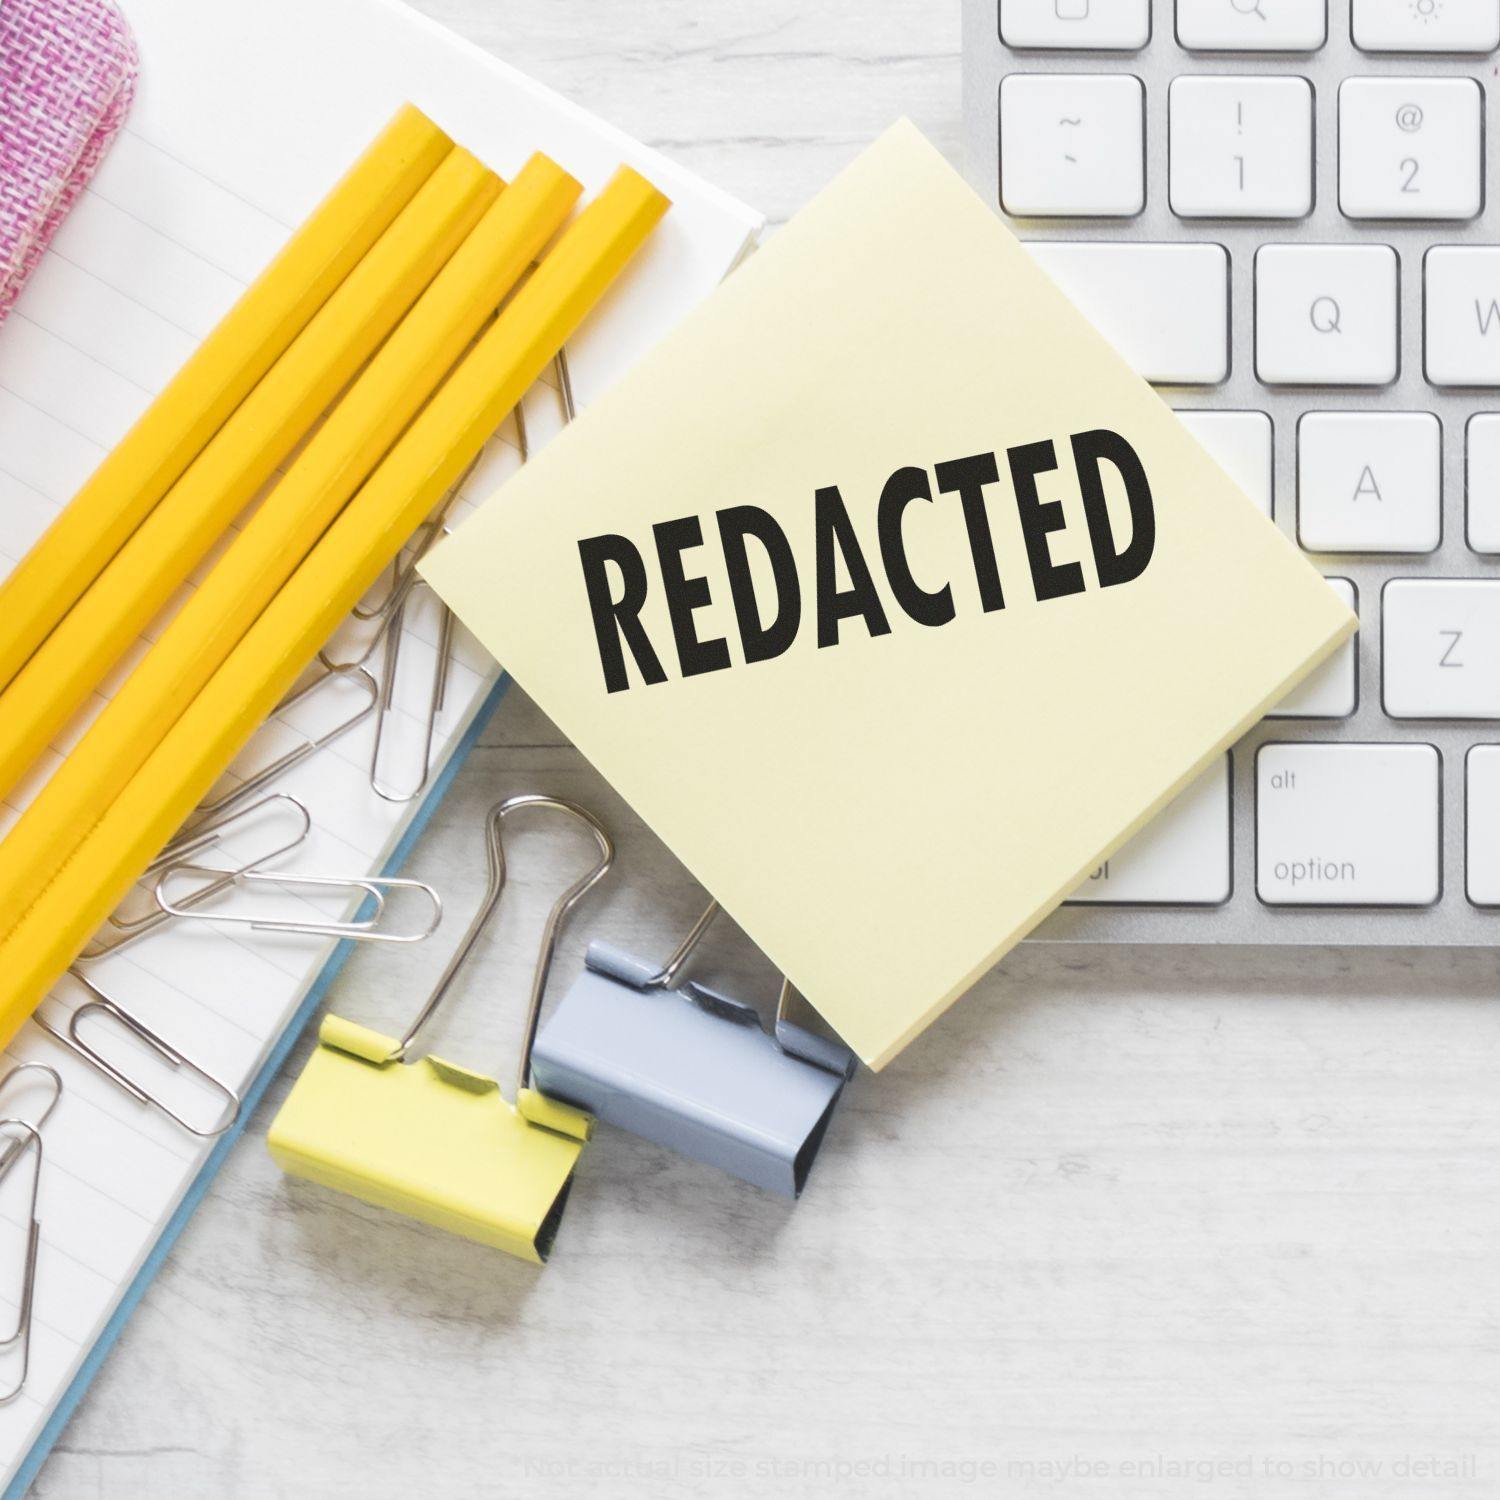 A stock office rubber stamp with a stamped image showing how the text "REDACTED" is displayed after stamping.